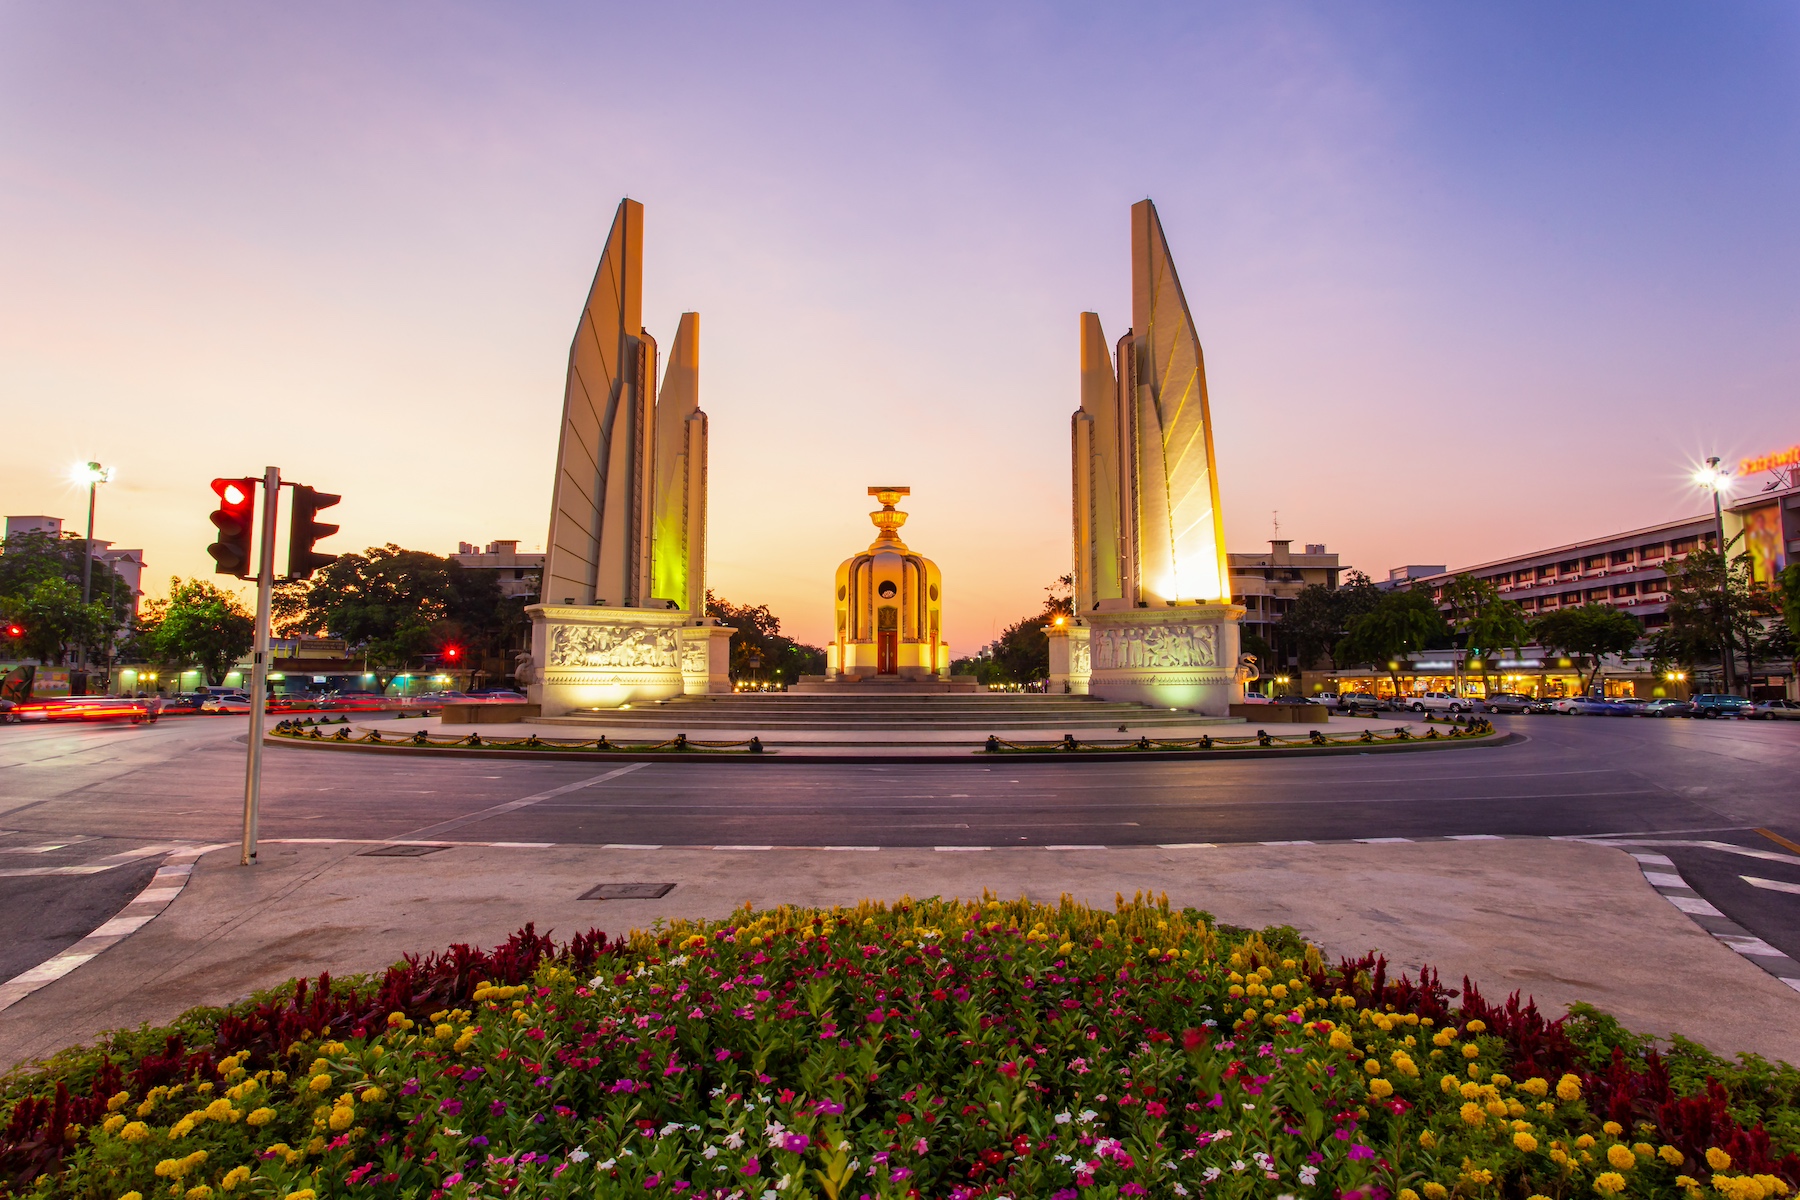 The Democracy Monument in Bangkok, Thailand, as shown from across the street at dusk